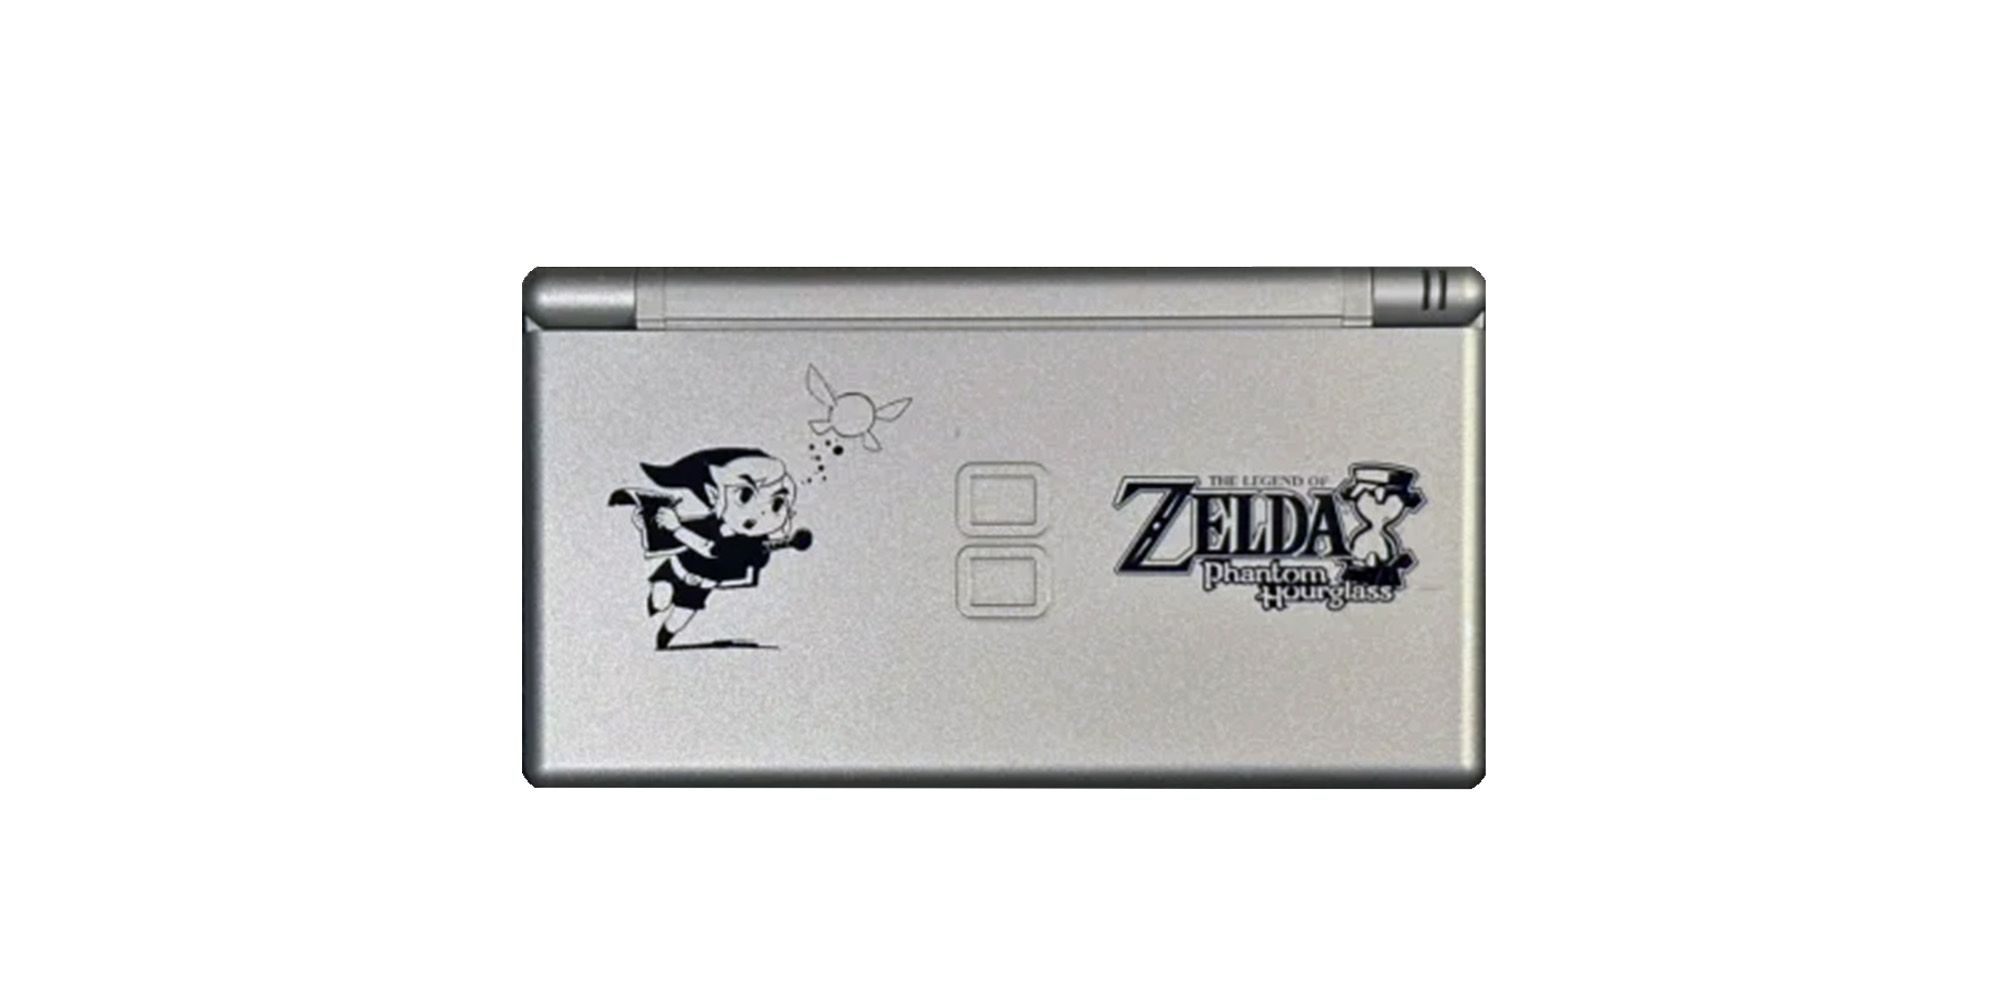 Silver Phantom Hourglass DS Lite released in the UK with an image of Toon Link and the game's logo and title.